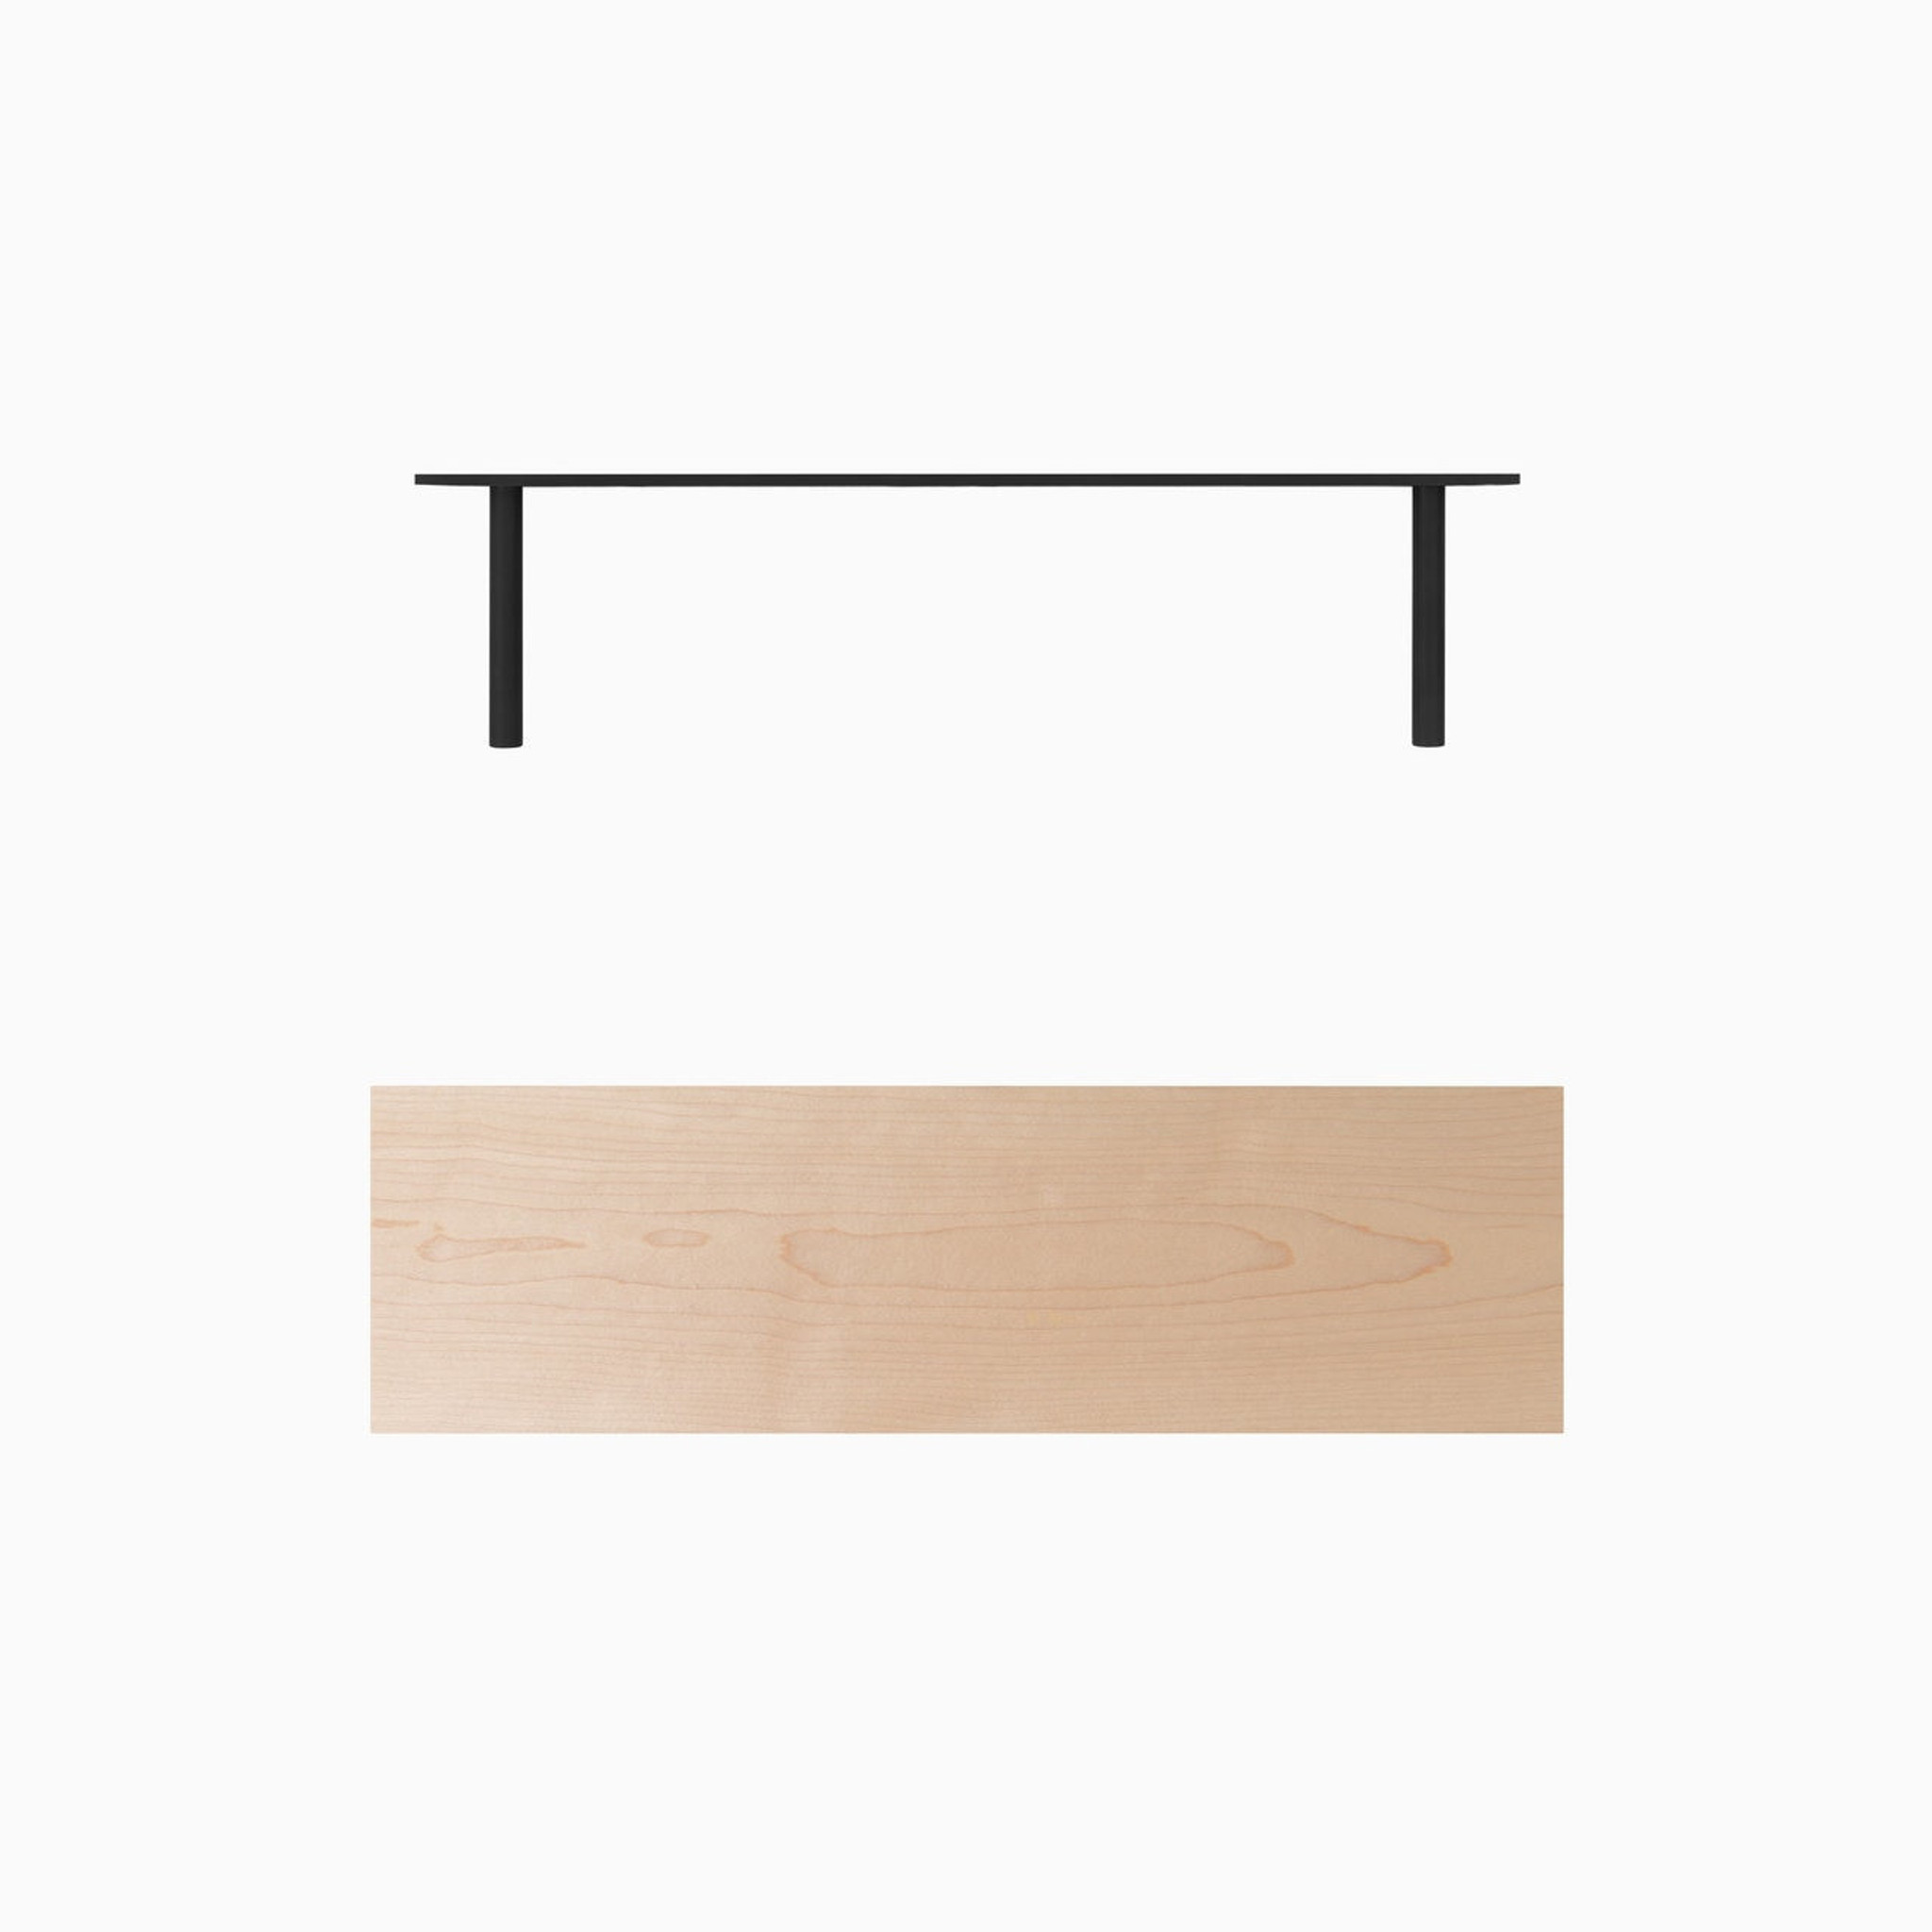 https://cdn11.bigcommerce.com/s-5k9p6e0vik/images/stencil/2048x2048/products/1231/13813/10-aksel-floating-shelf-system-nearly-naked-maple-solid-parts__56535.1523991517.1280.1280__92567.1659359021.1280.1280__51609.1683826439.jpg?c=2